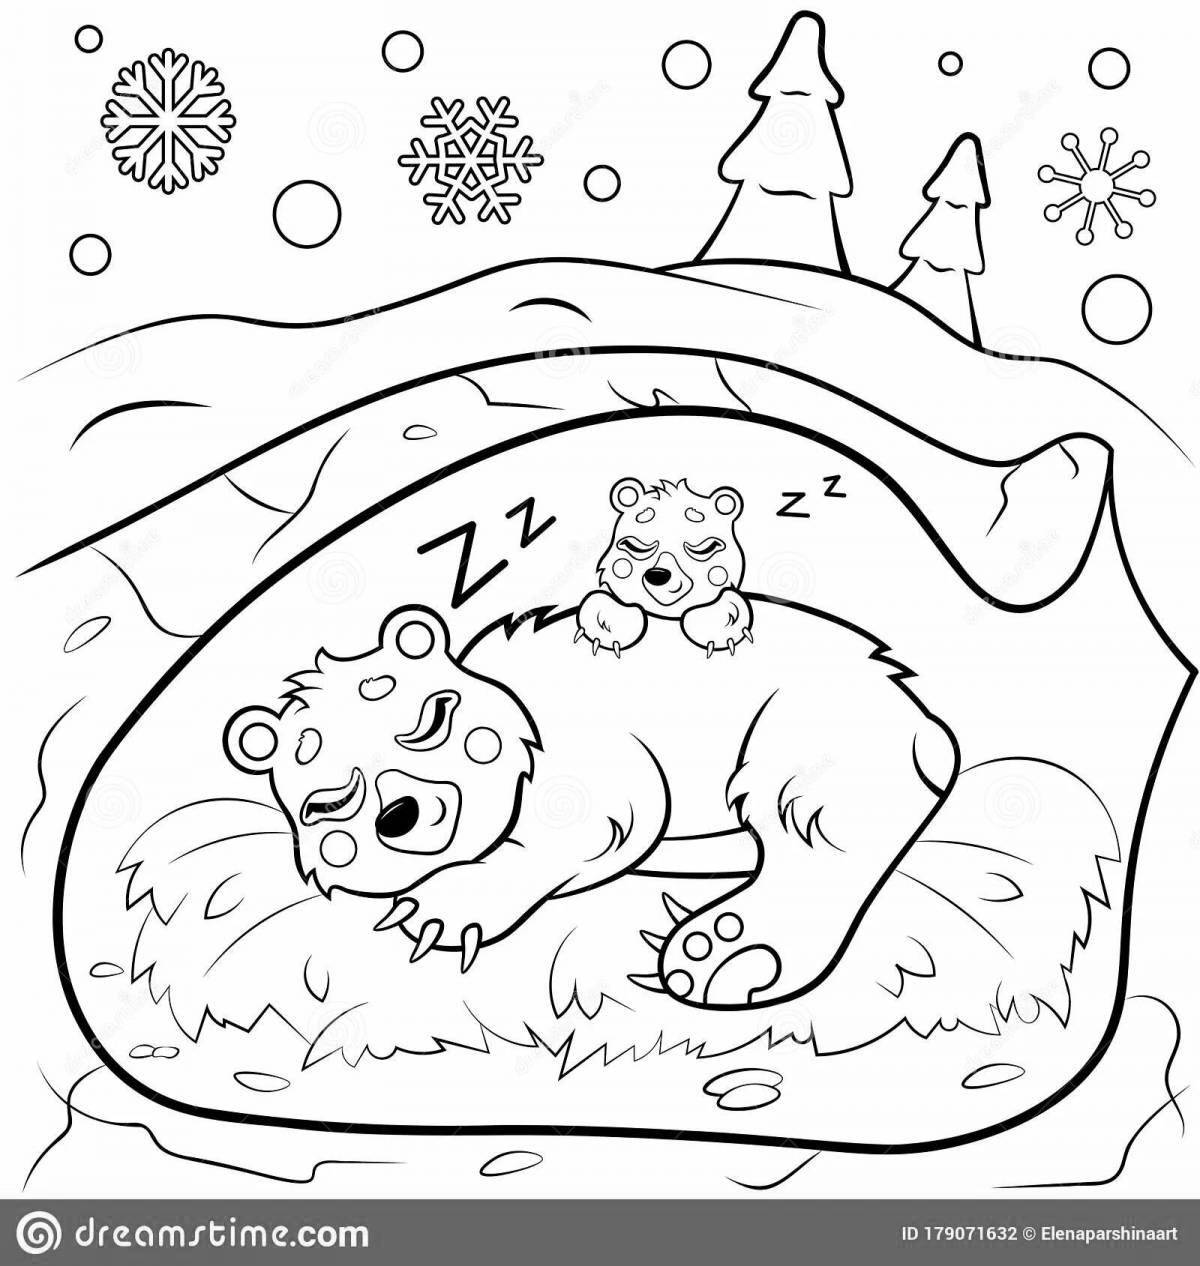 Fun coloring pages with winter animals for kids